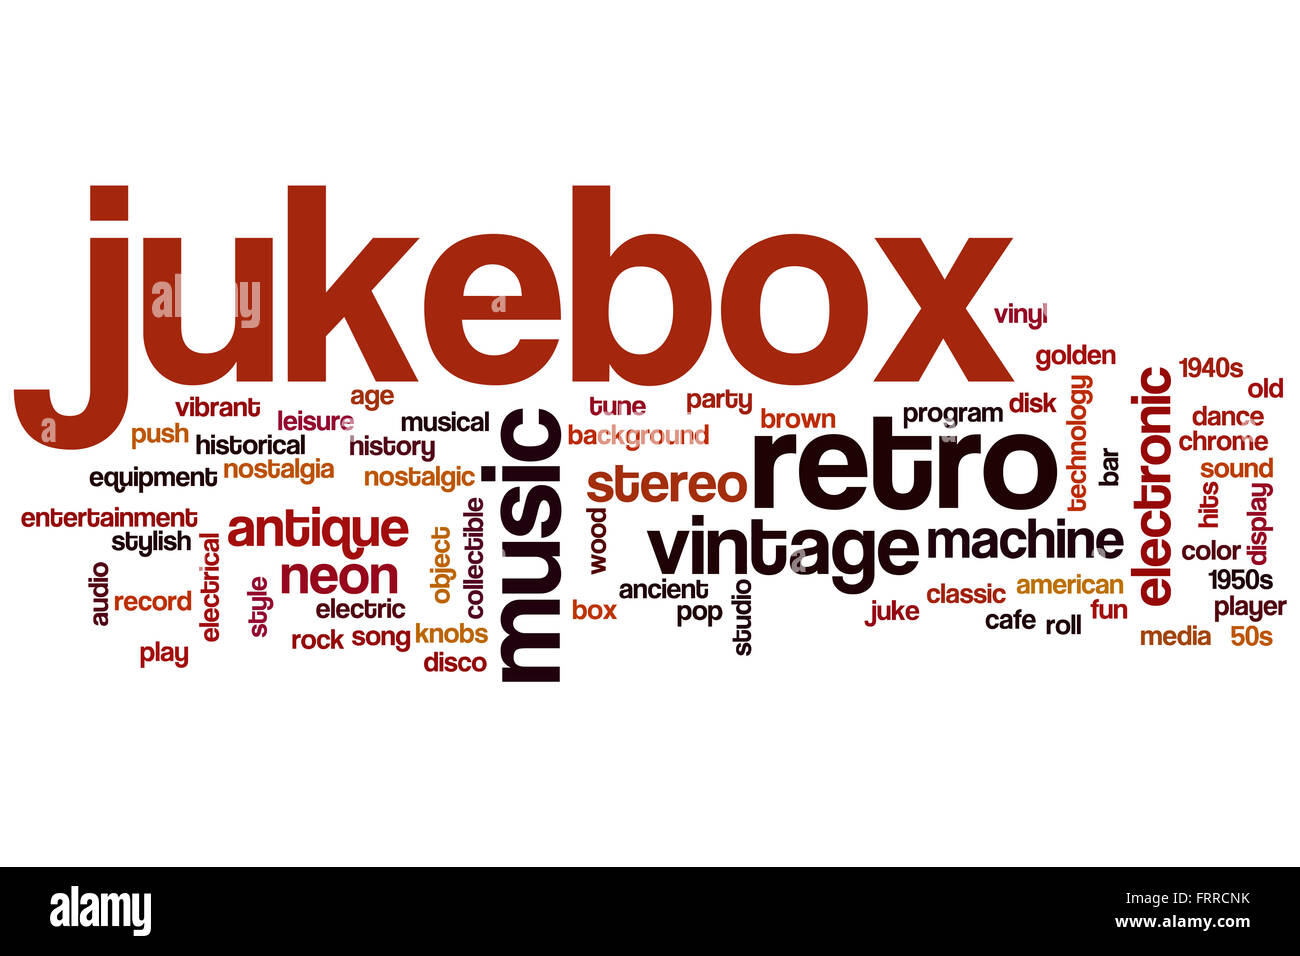 Jukebox word cloud concept with retro music related tags Stock Photo